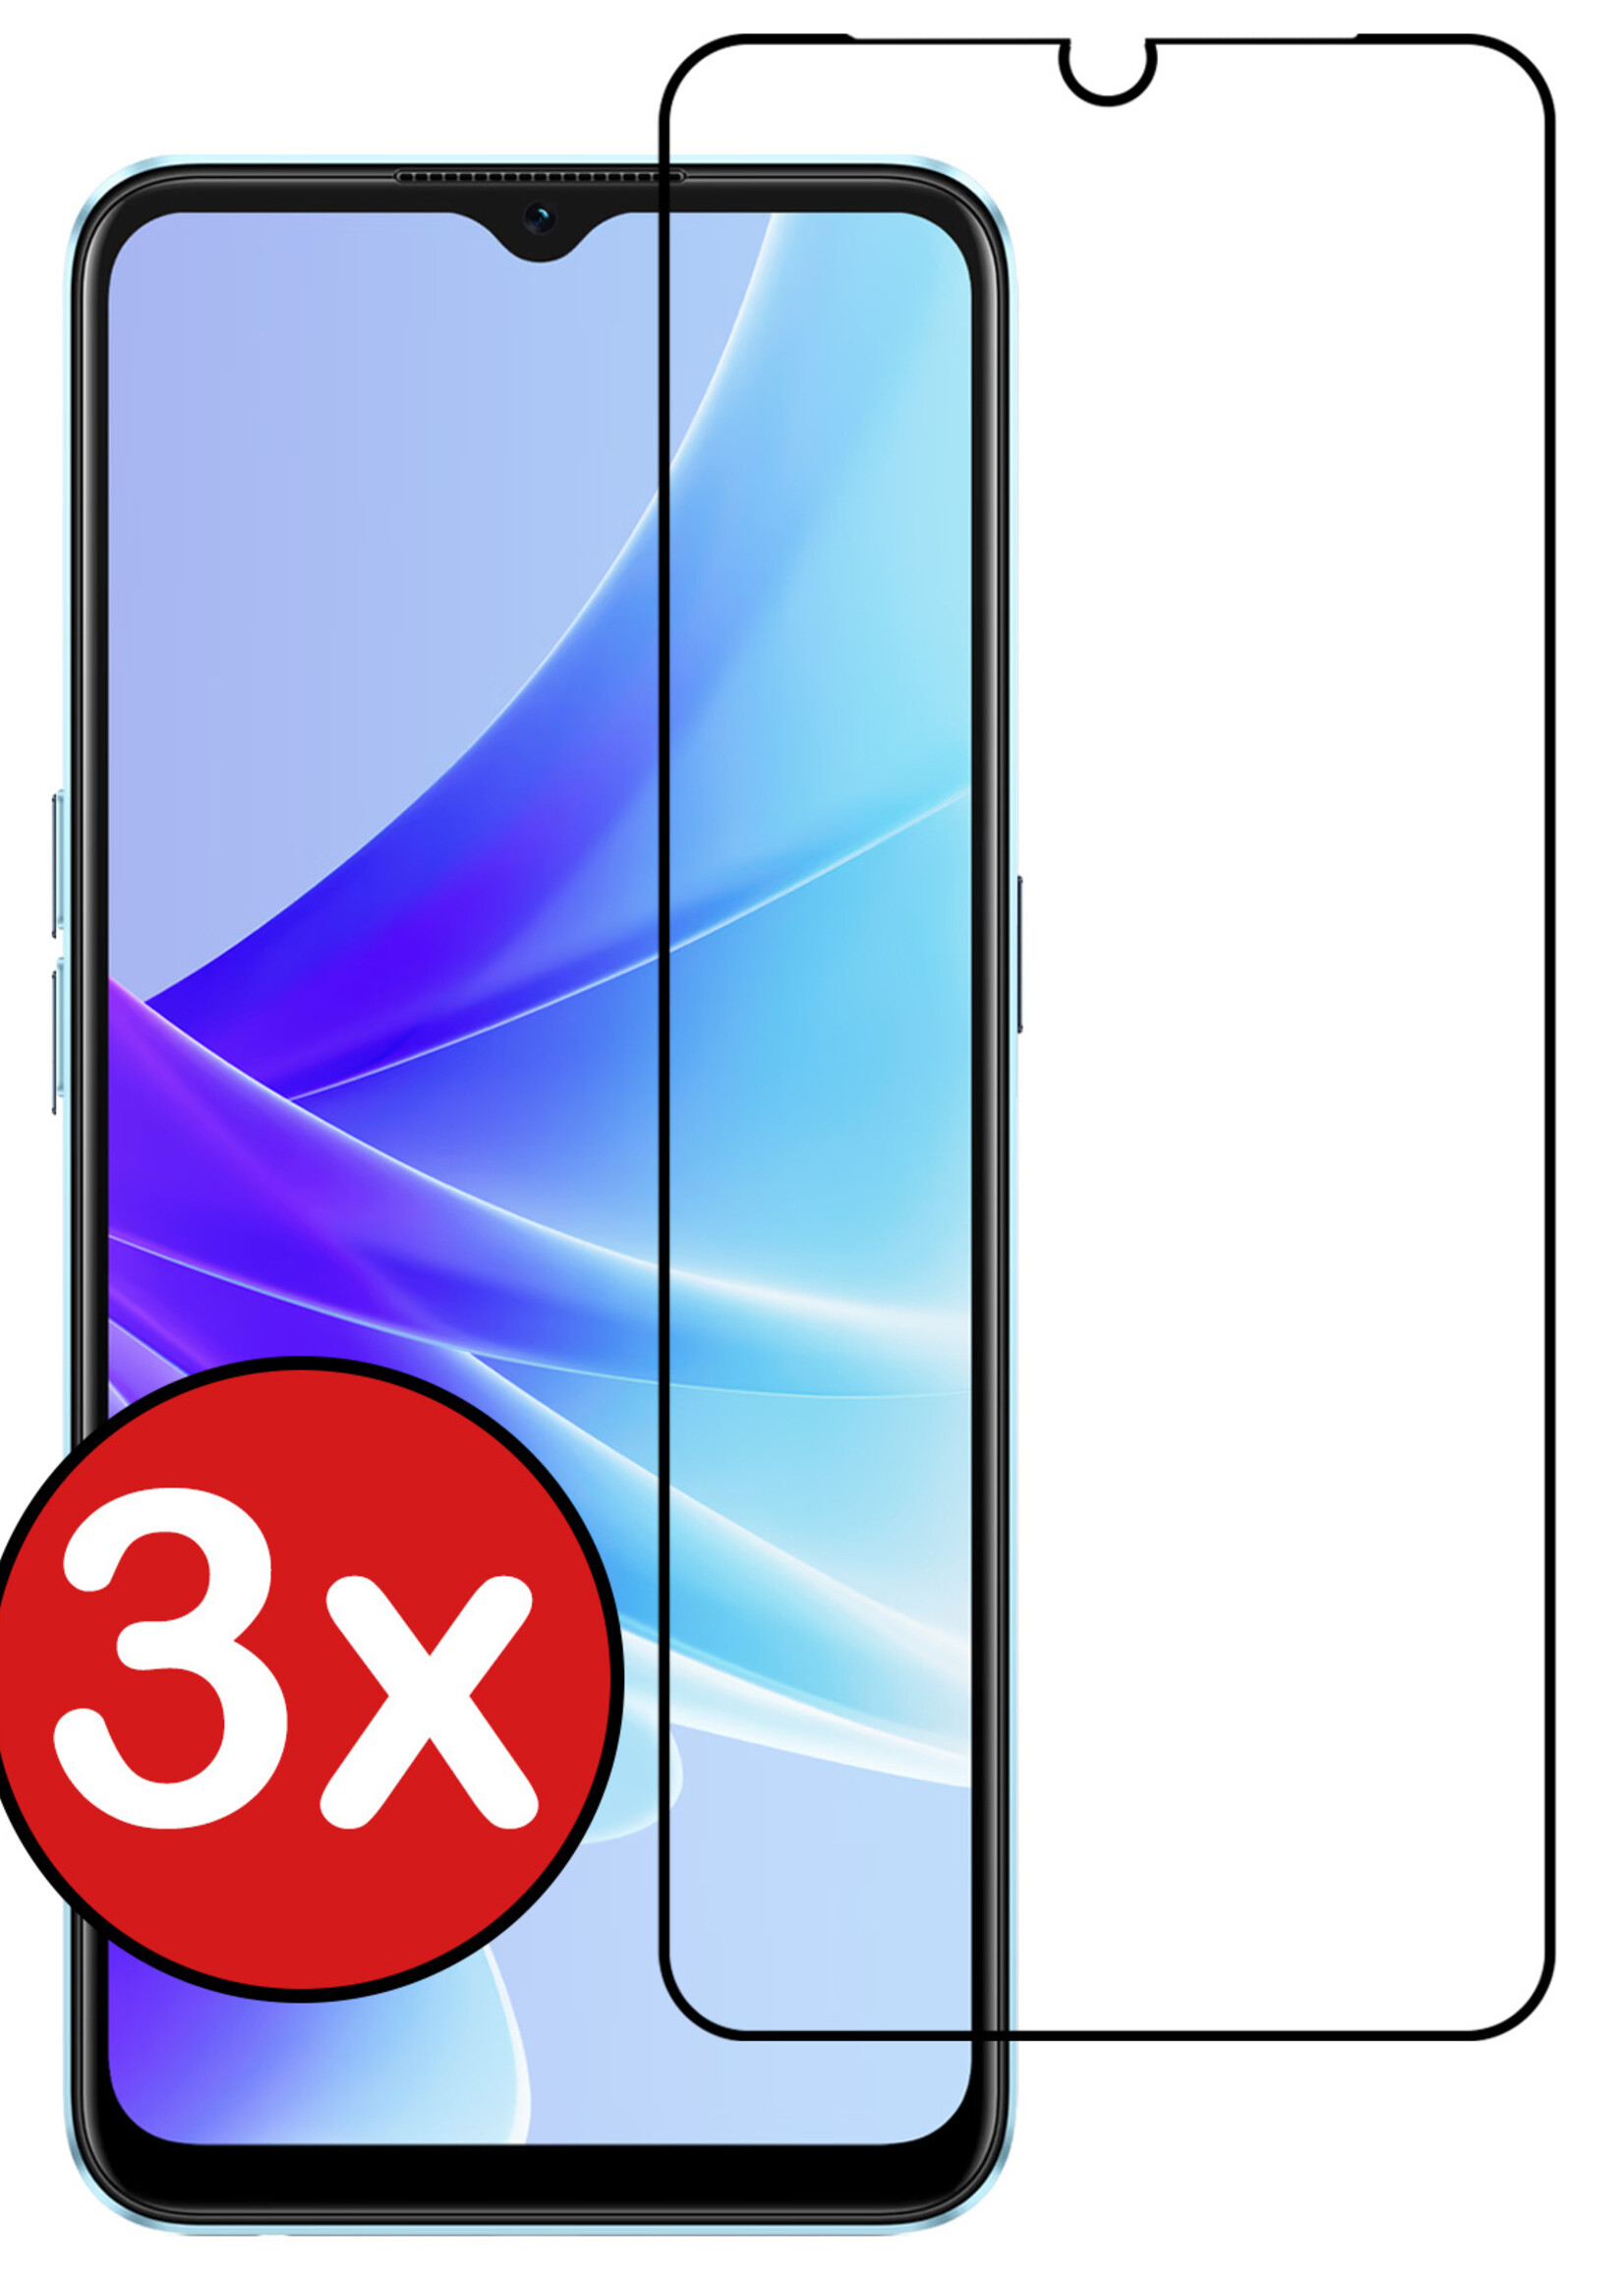 BTH Screenprotector Geschikt voor OPPO A17 Screenprotector Glas Gehard Tempered Glass Full Cover - Screenprotector Geschikt voor OPPO A17 Screen Protector Screen Cover - 3 PACK